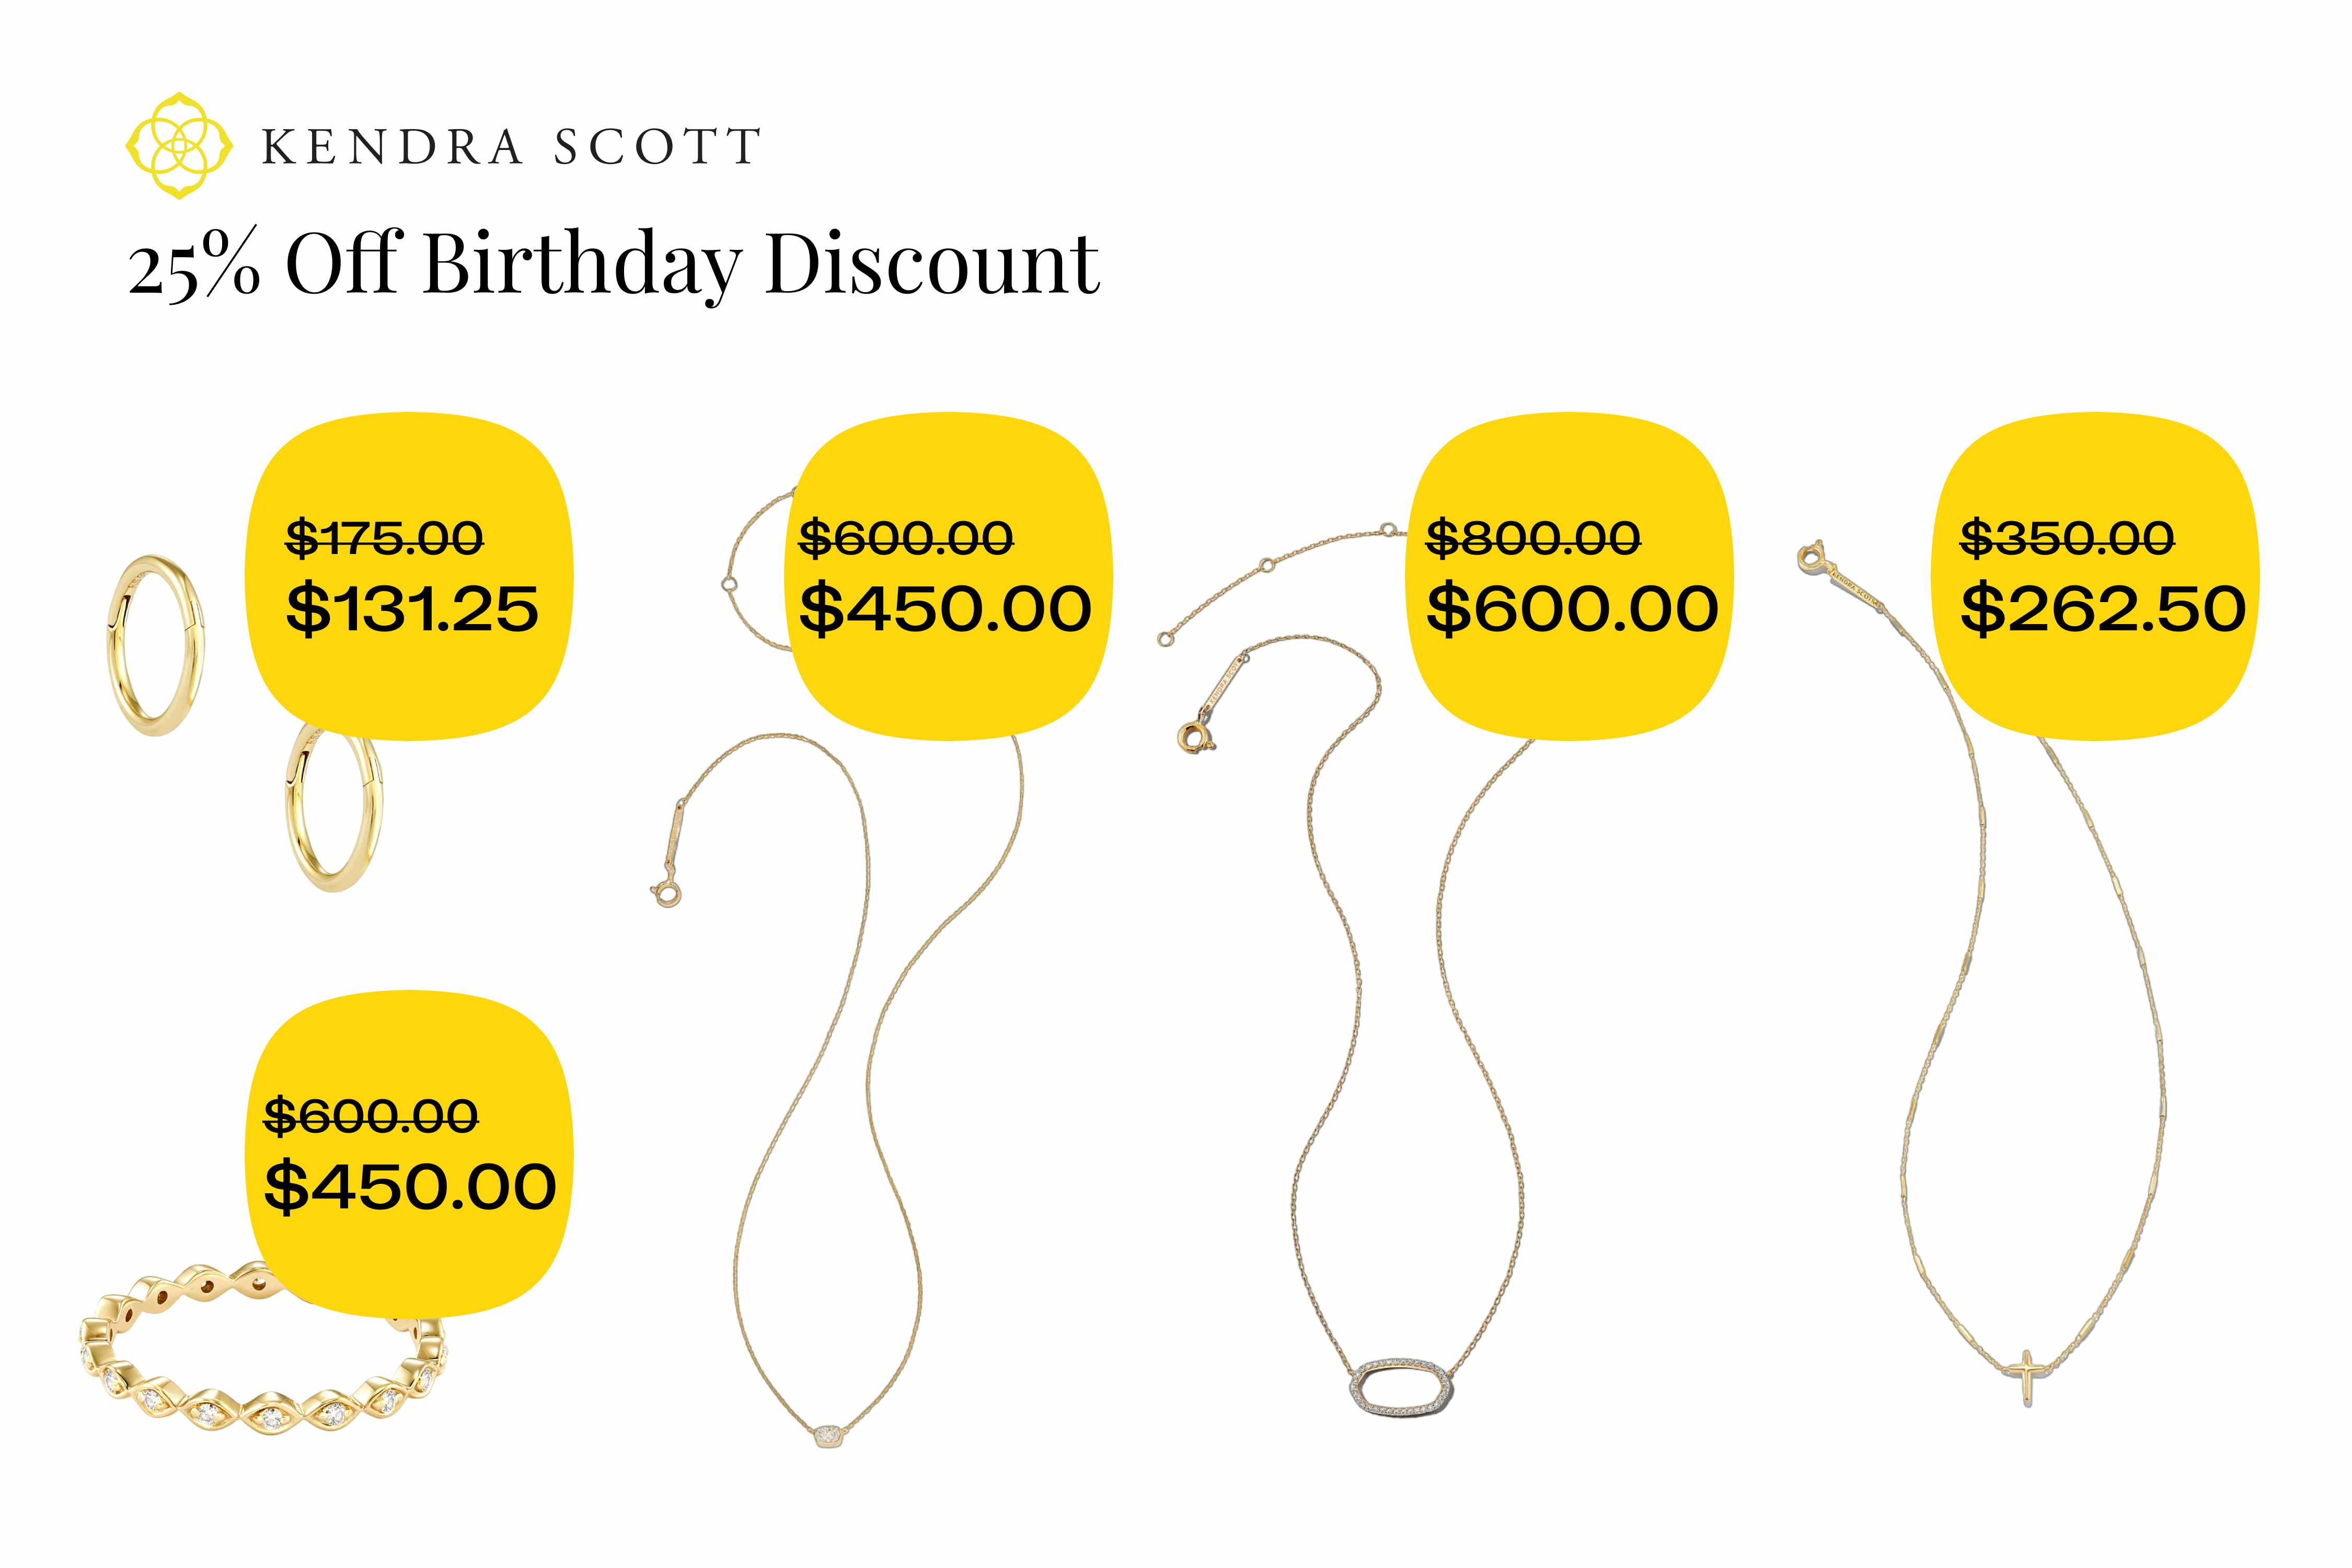 jewelry from Kendra Scott with a 25% birthday discount